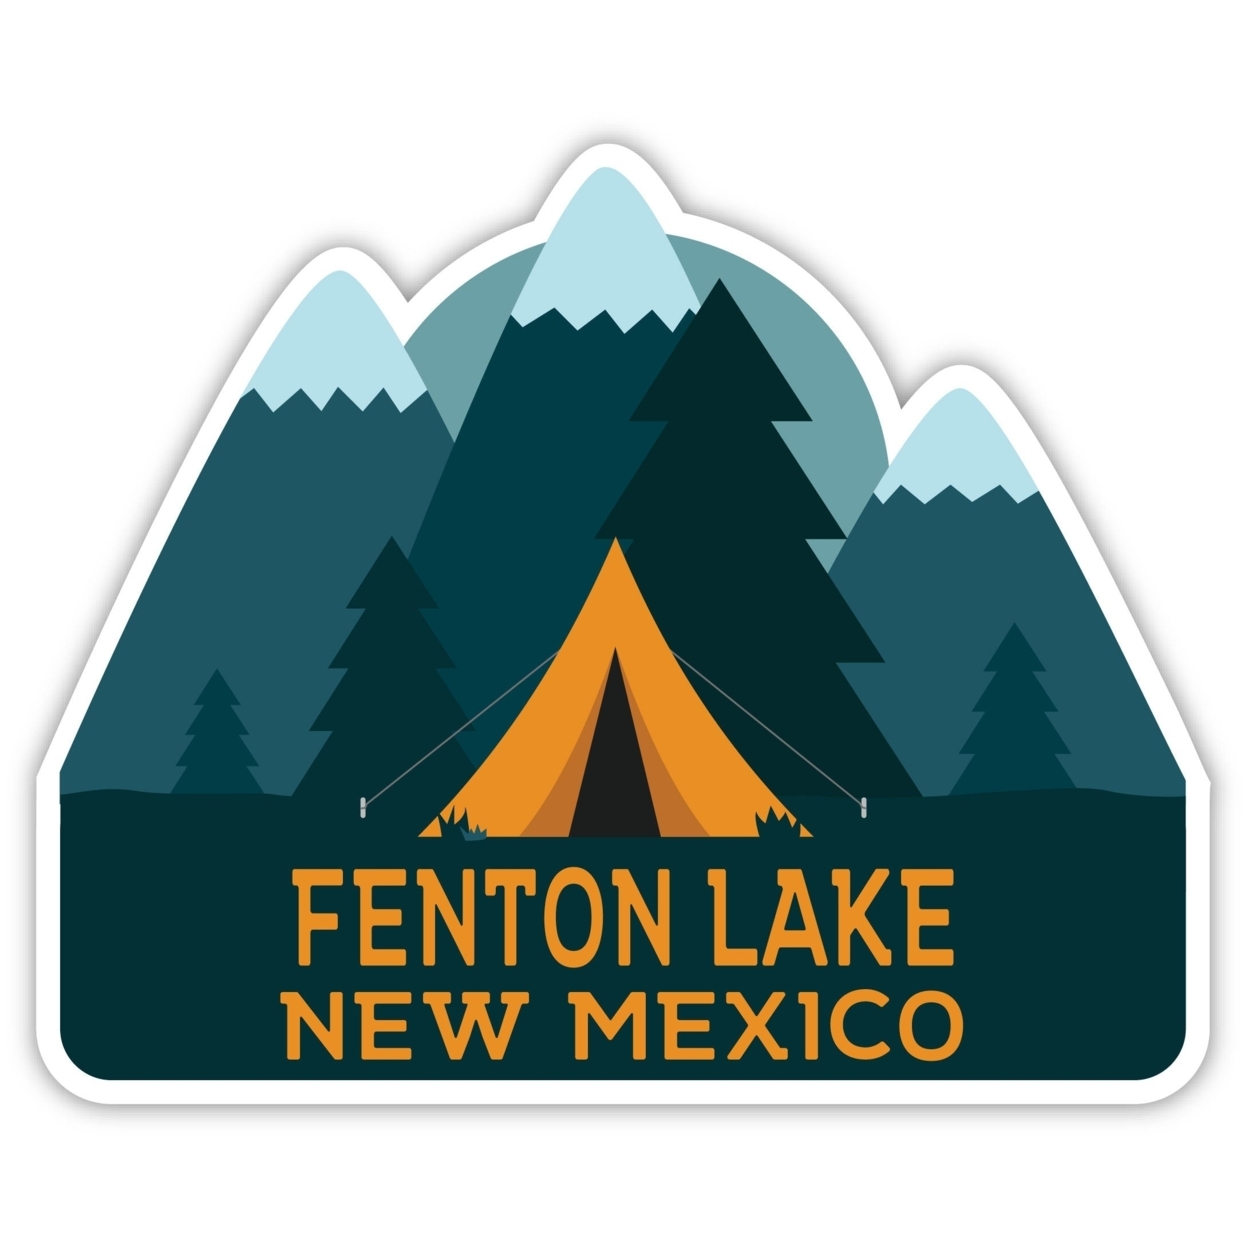 Fenton Lake New Mexico Souvenir Decorative Stickers (Choose Theme And Size) - 4-Pack, 2-Inch, Tent